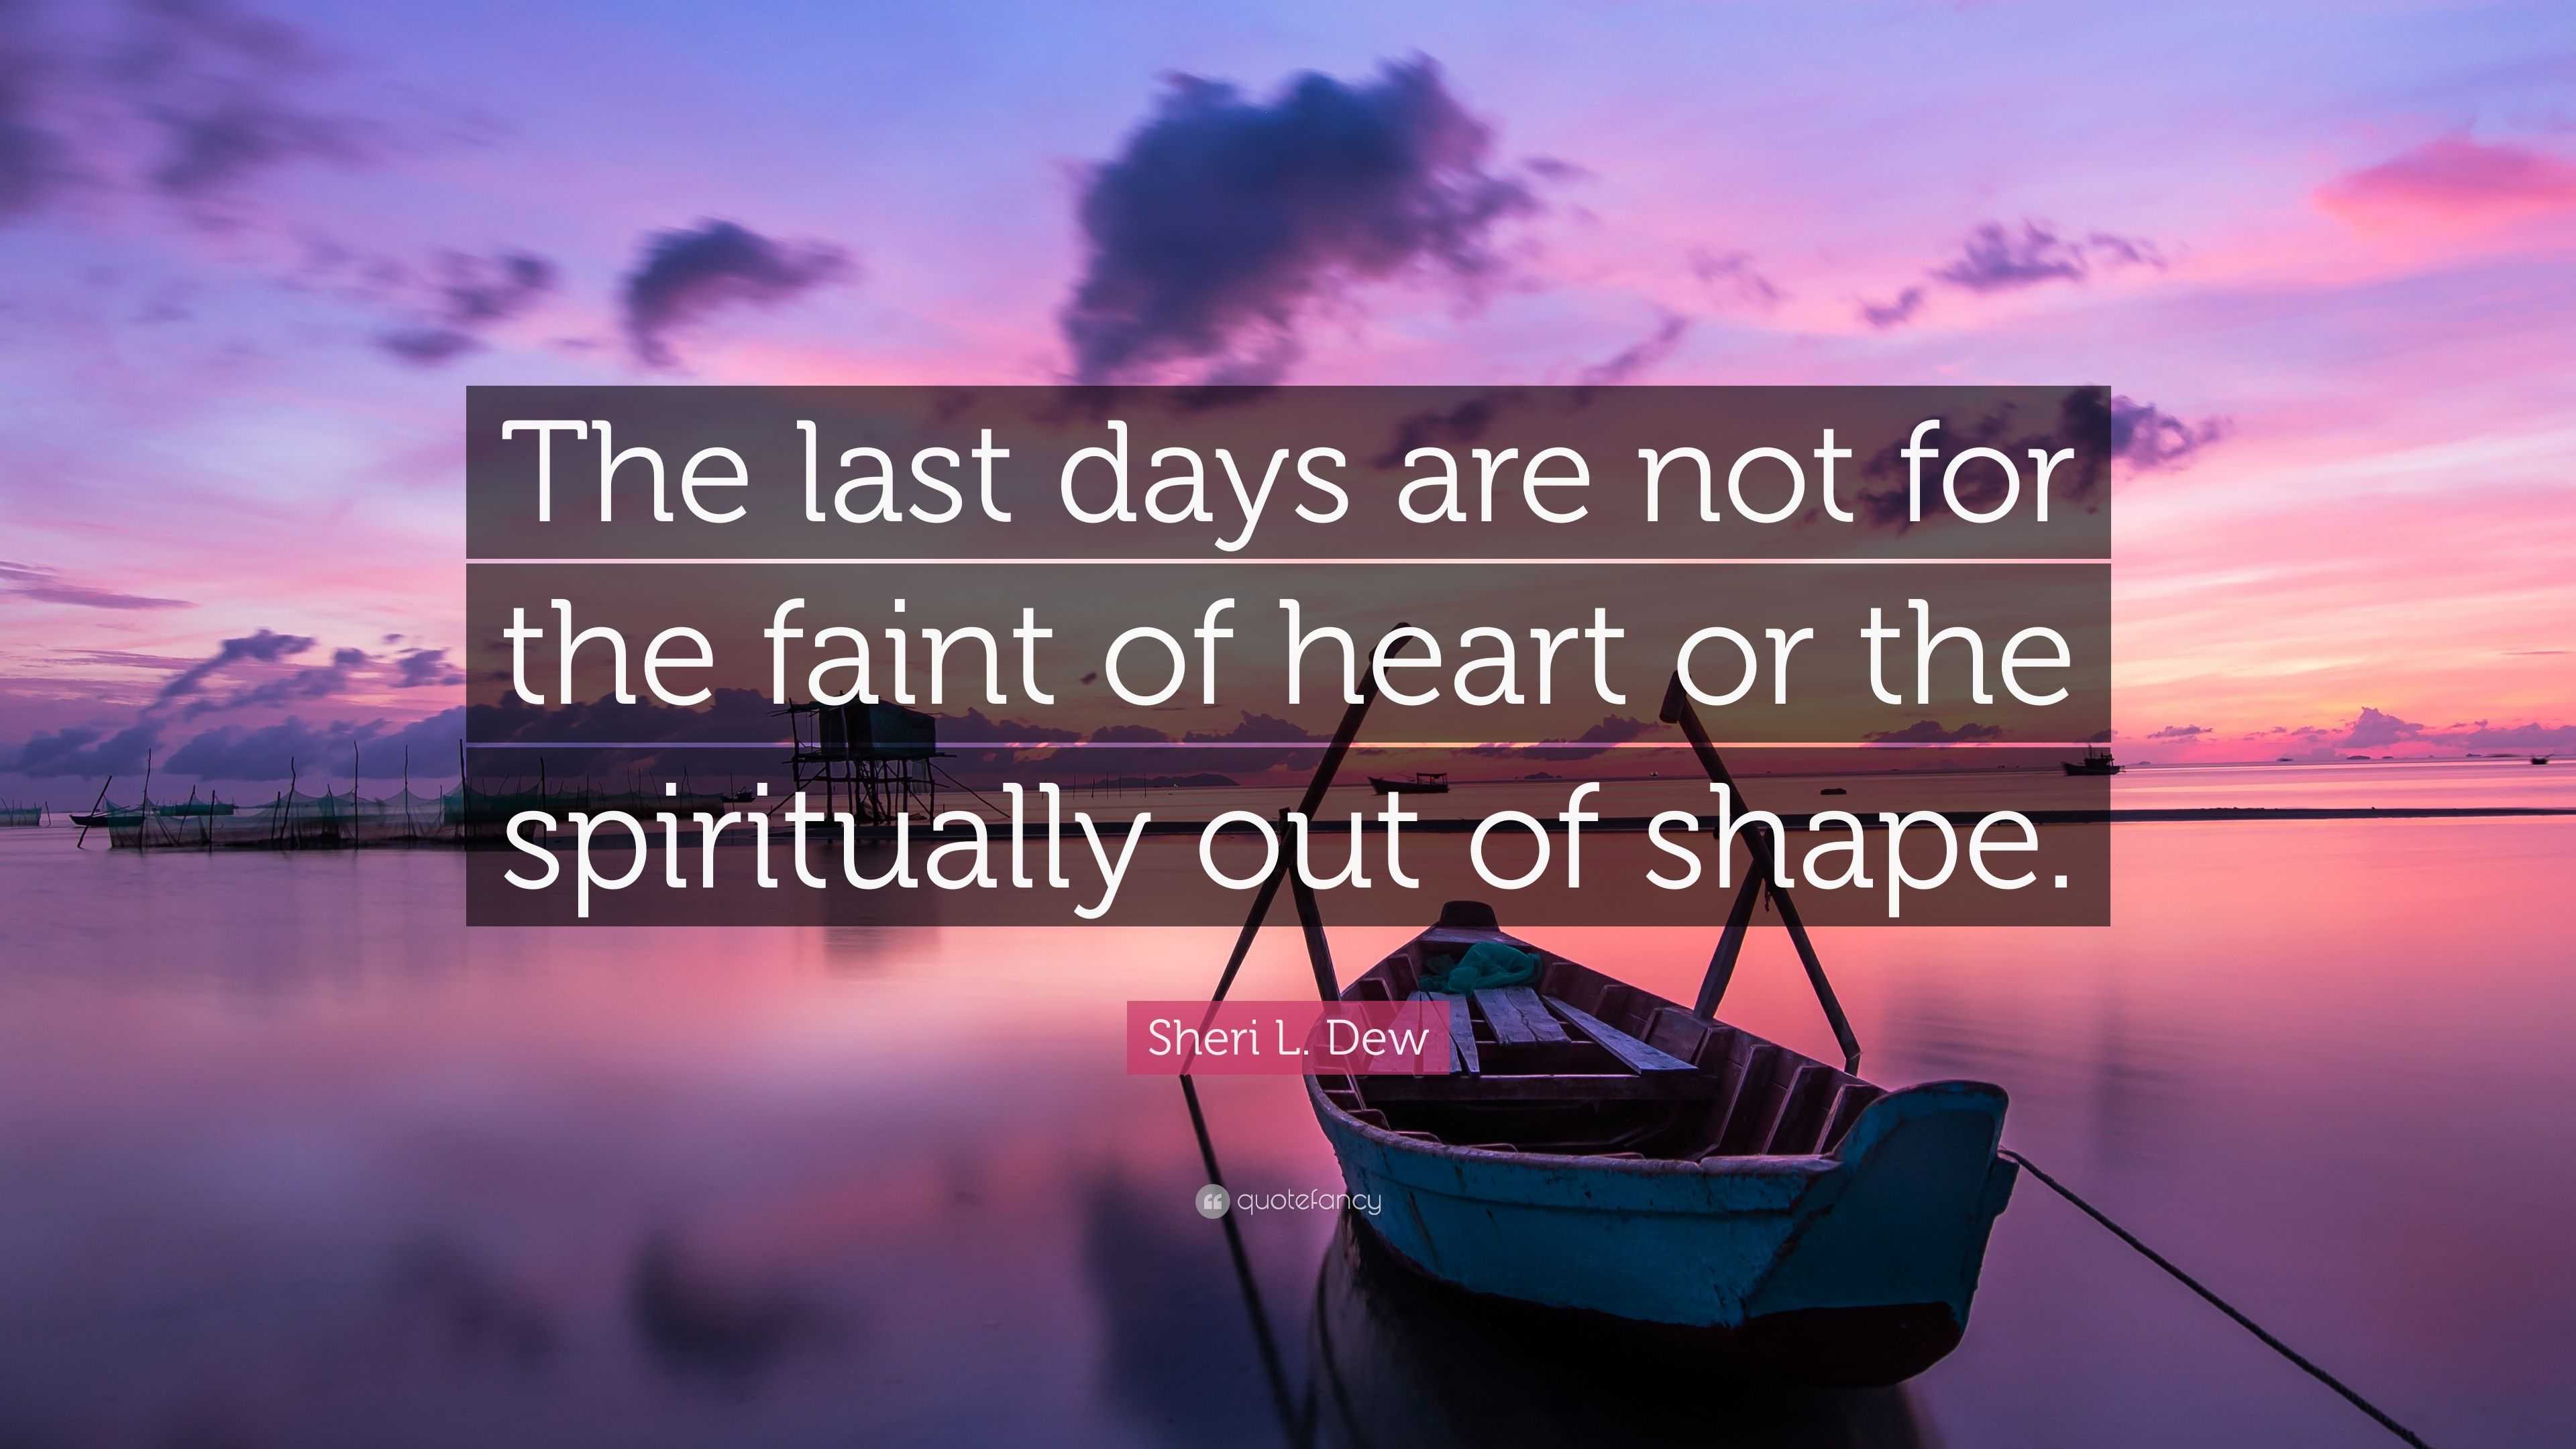 Sheri L. Dew Quote: “The last days are not for the faint of heart or